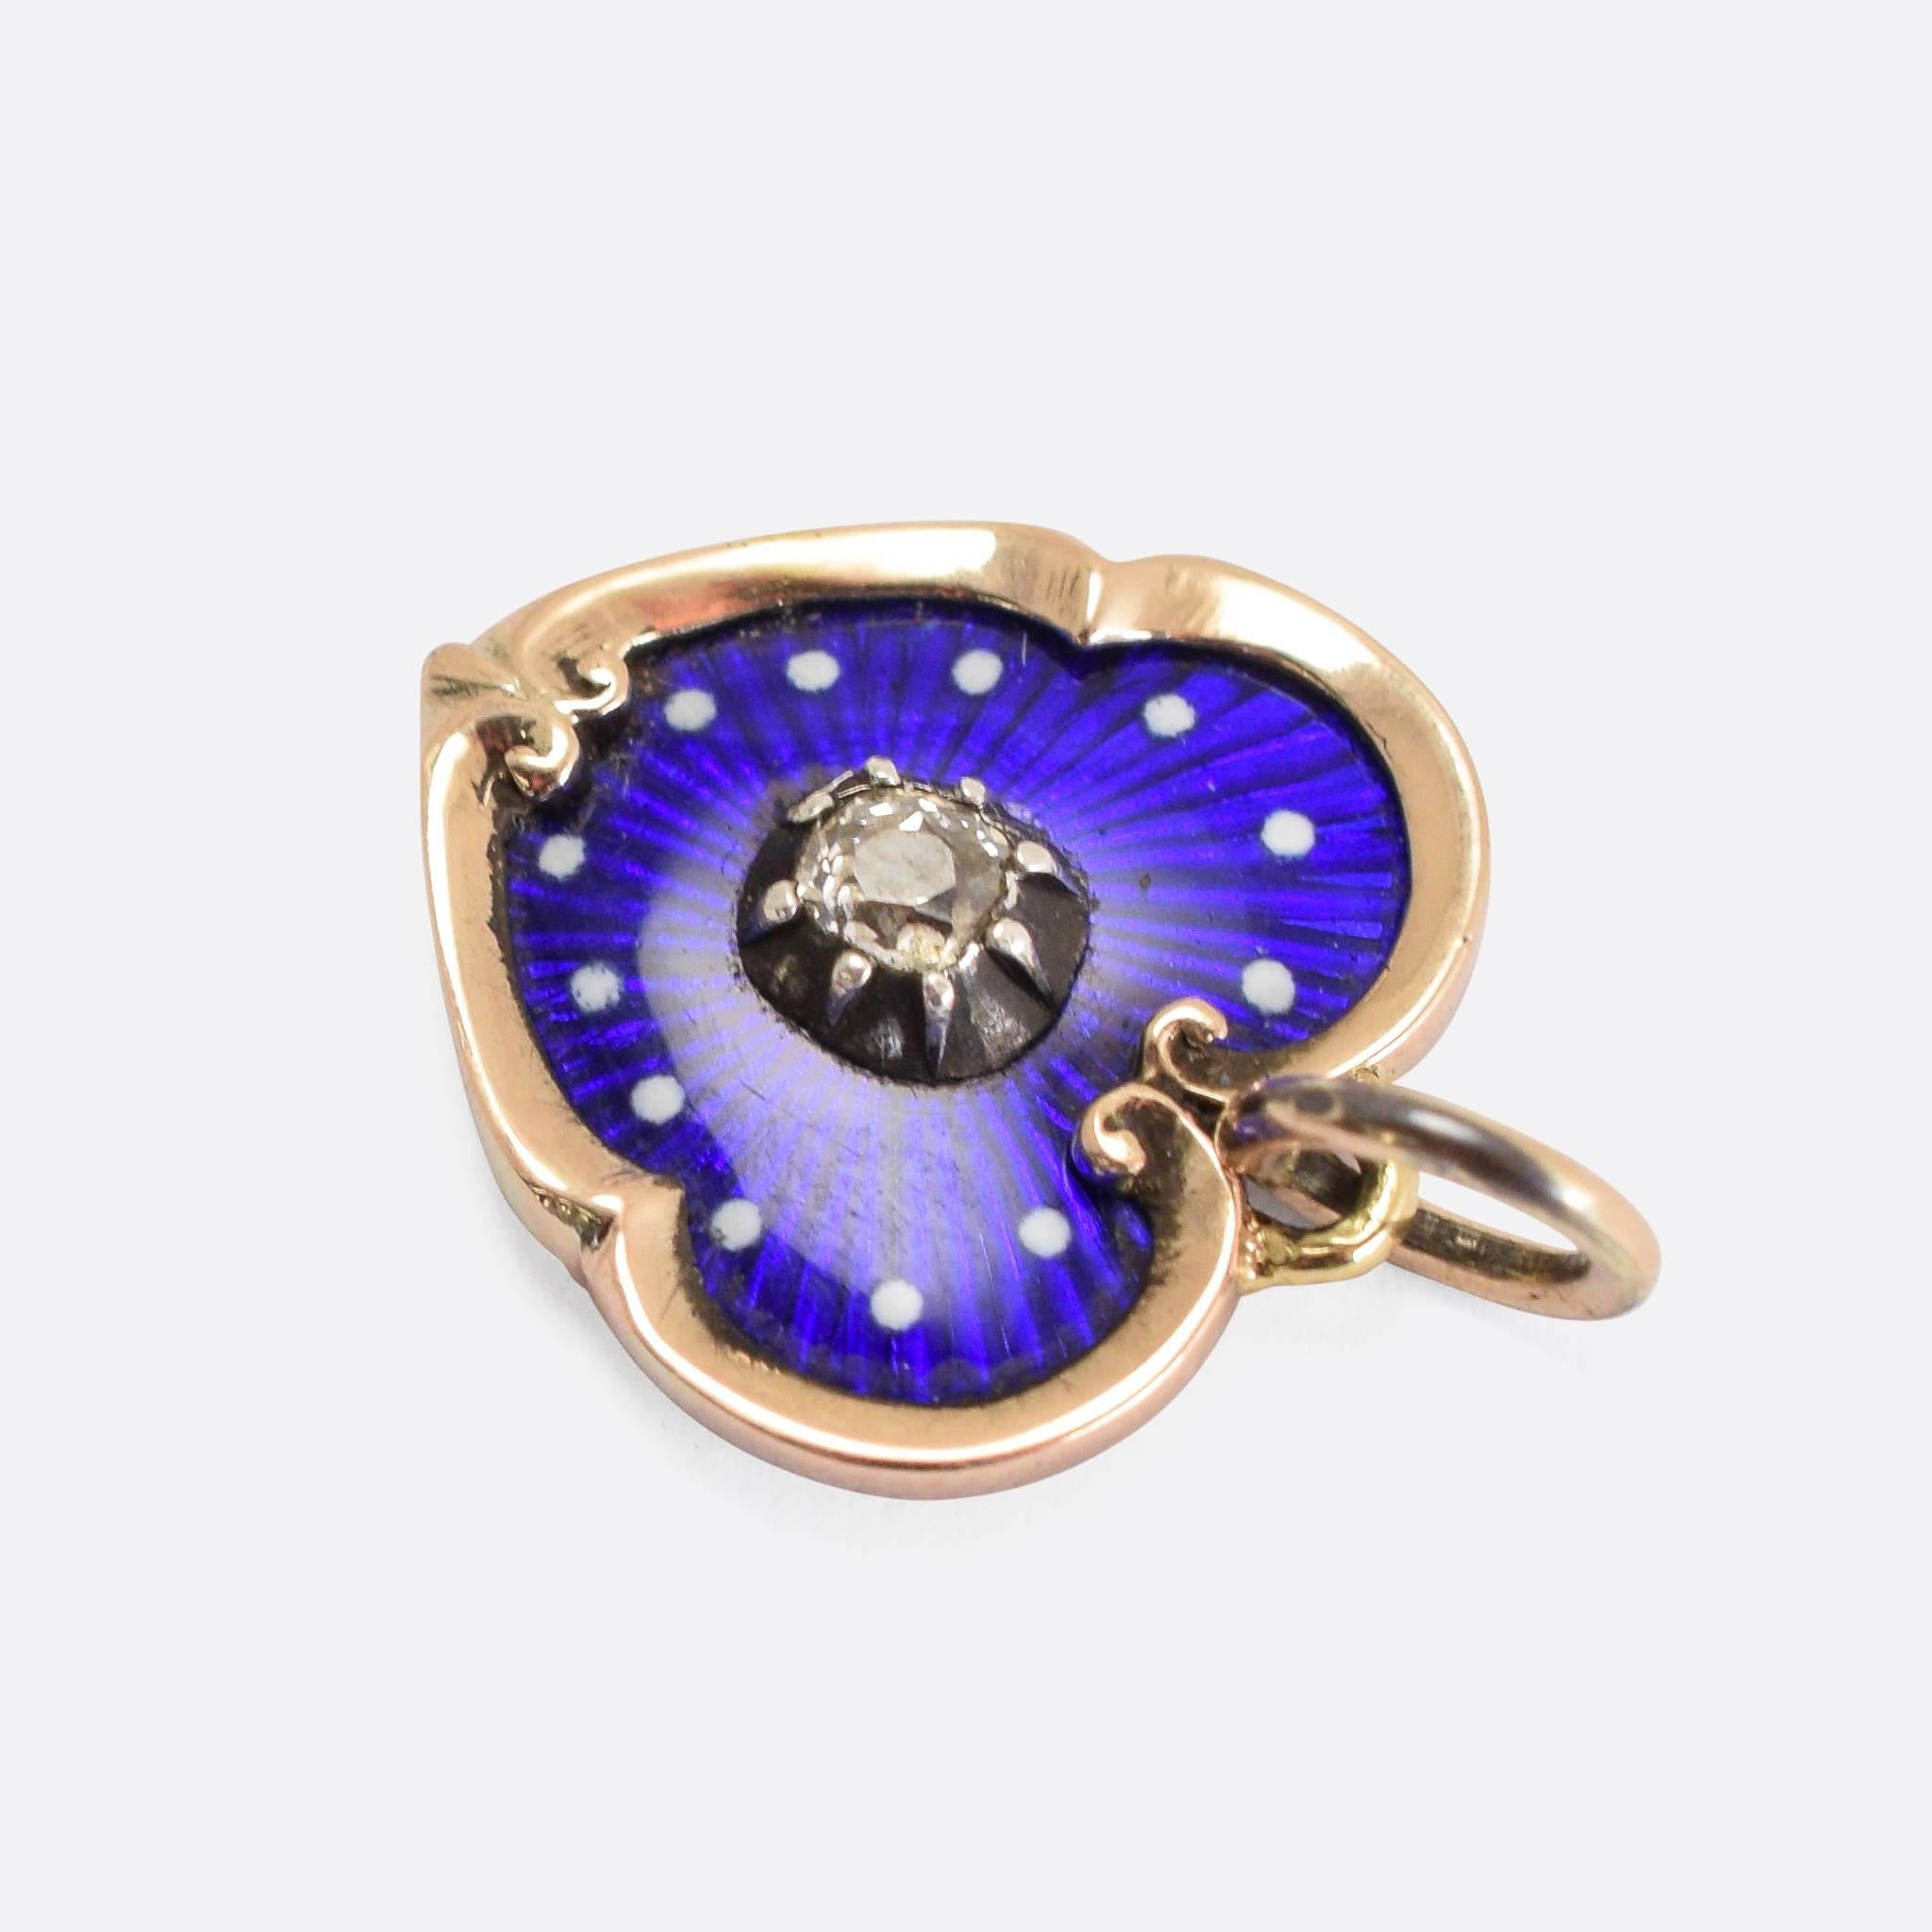 The sweet 15k gold shaped heart is set with guilloché blue enamel and a central cushion cut diamond in a cut back Georgian type collet setting. 